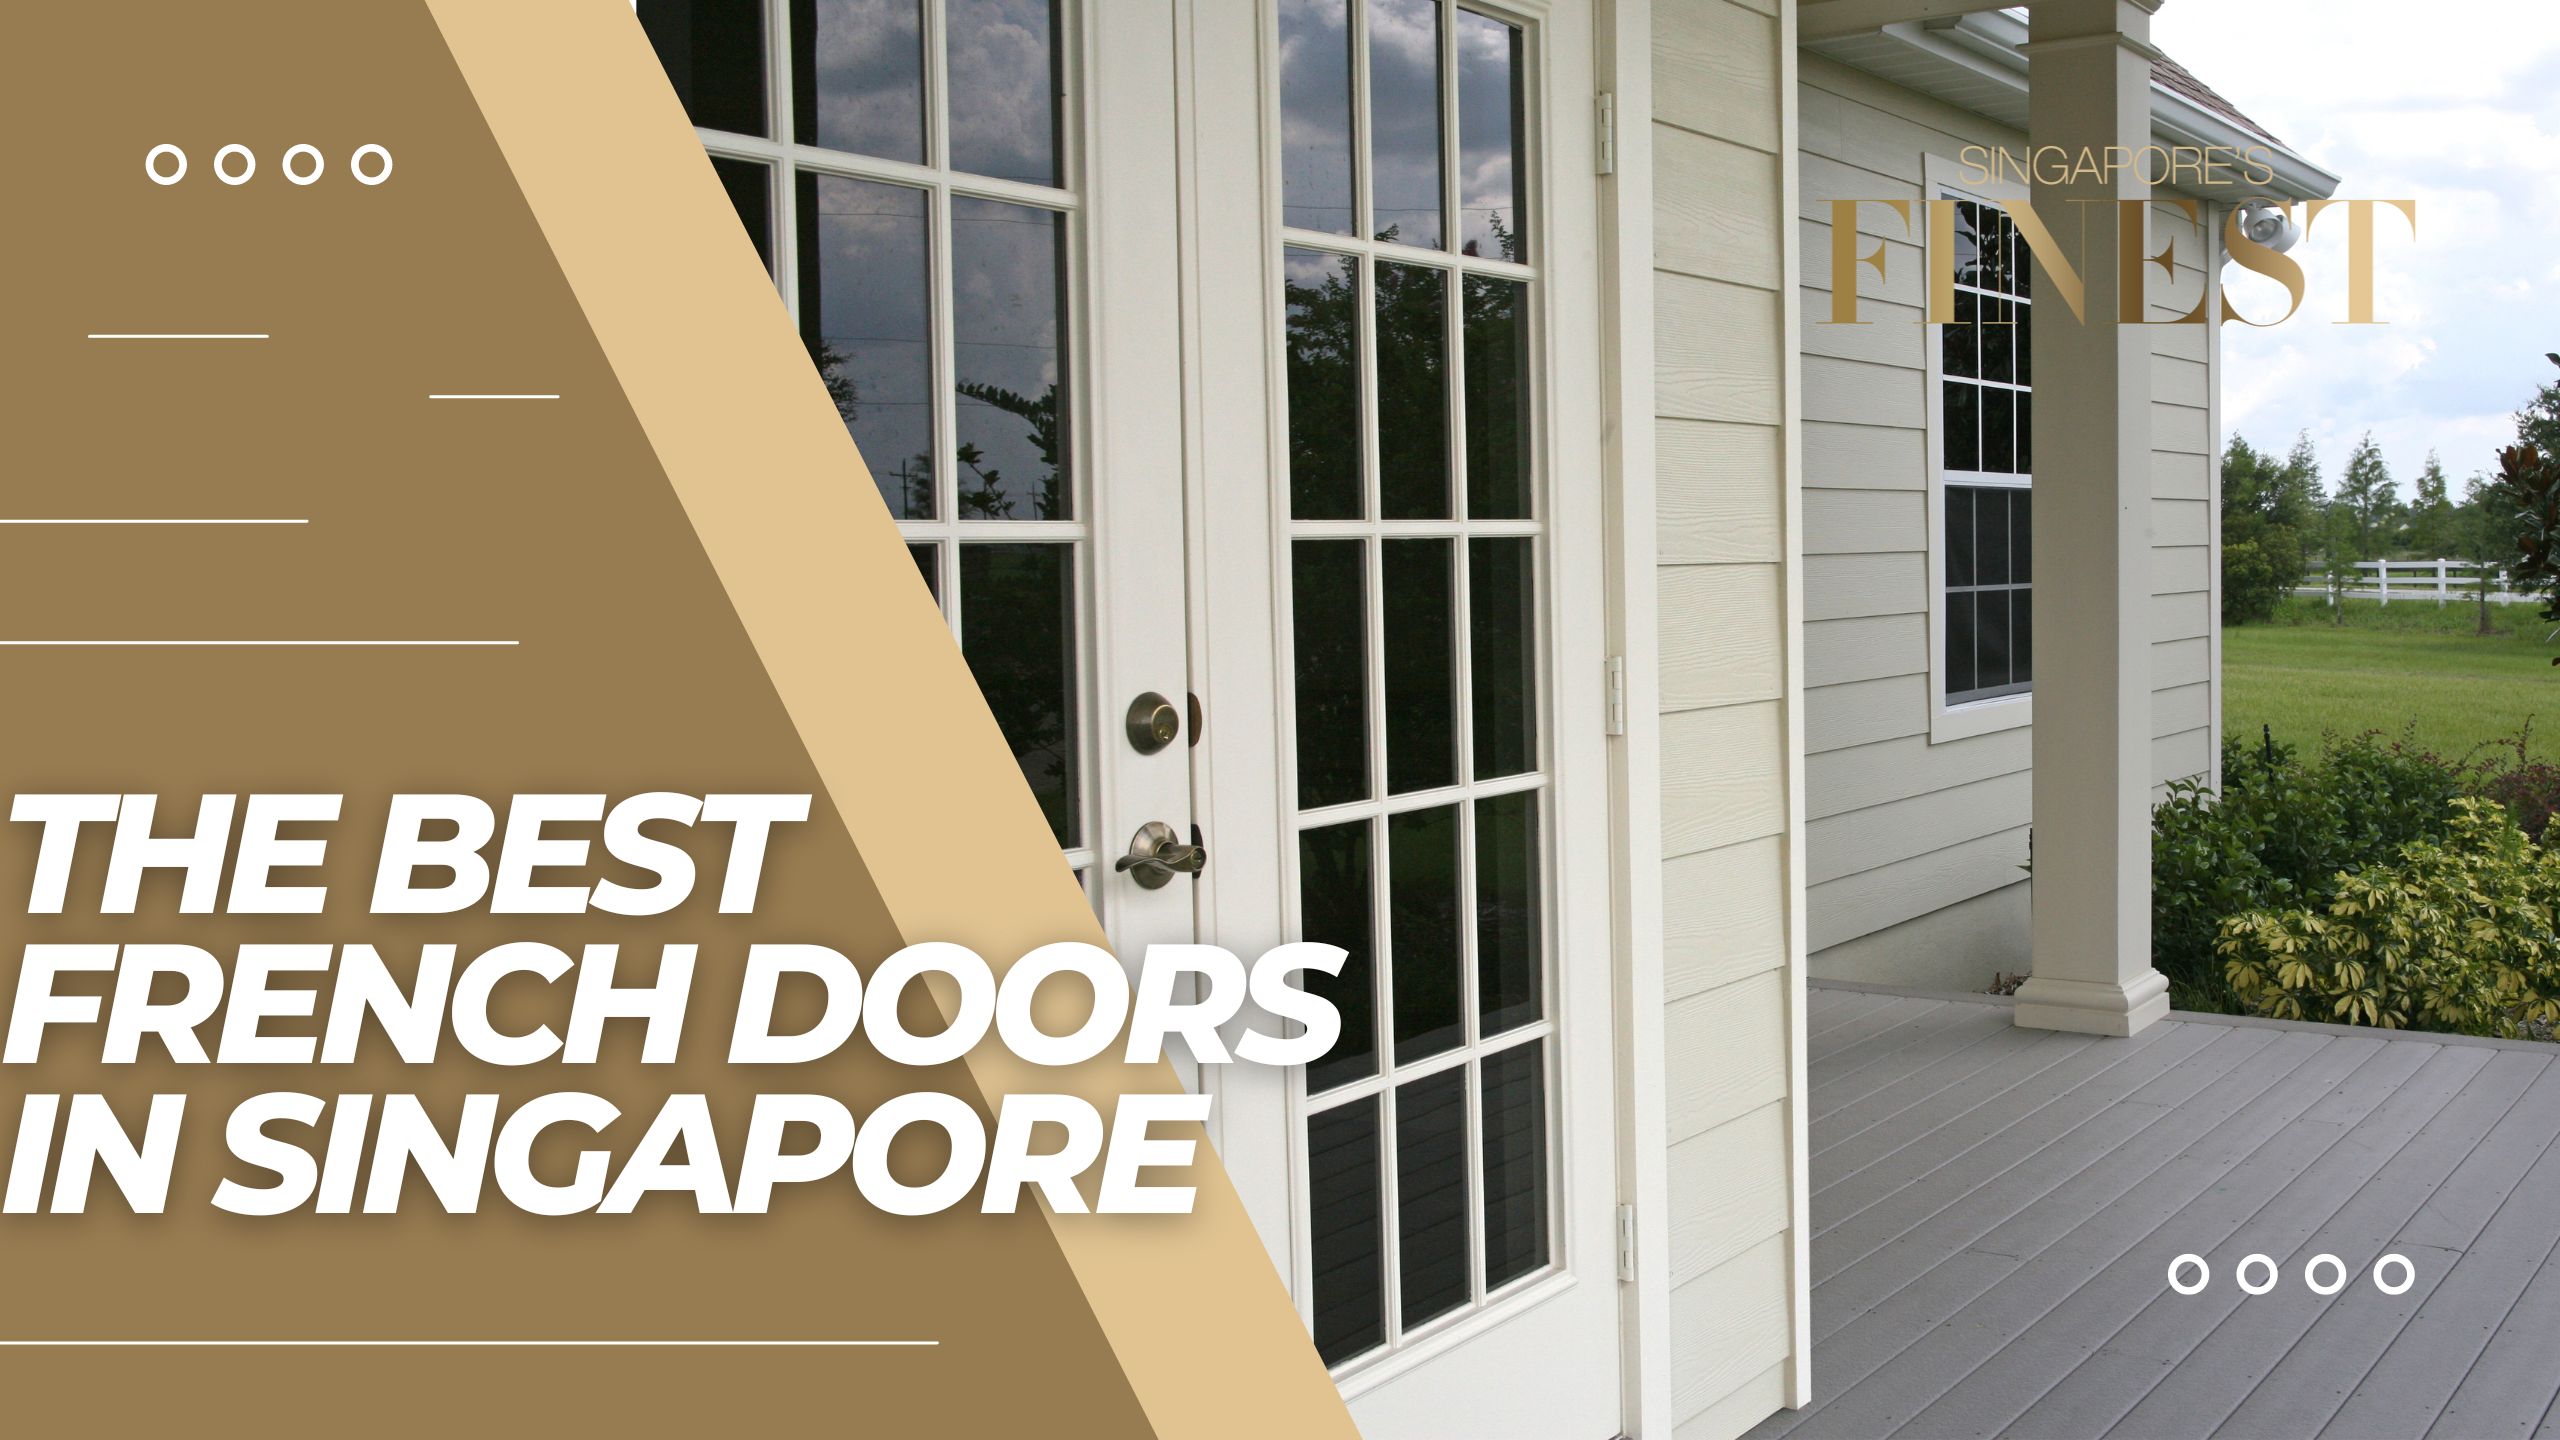 The Finest French Doors in Singapore